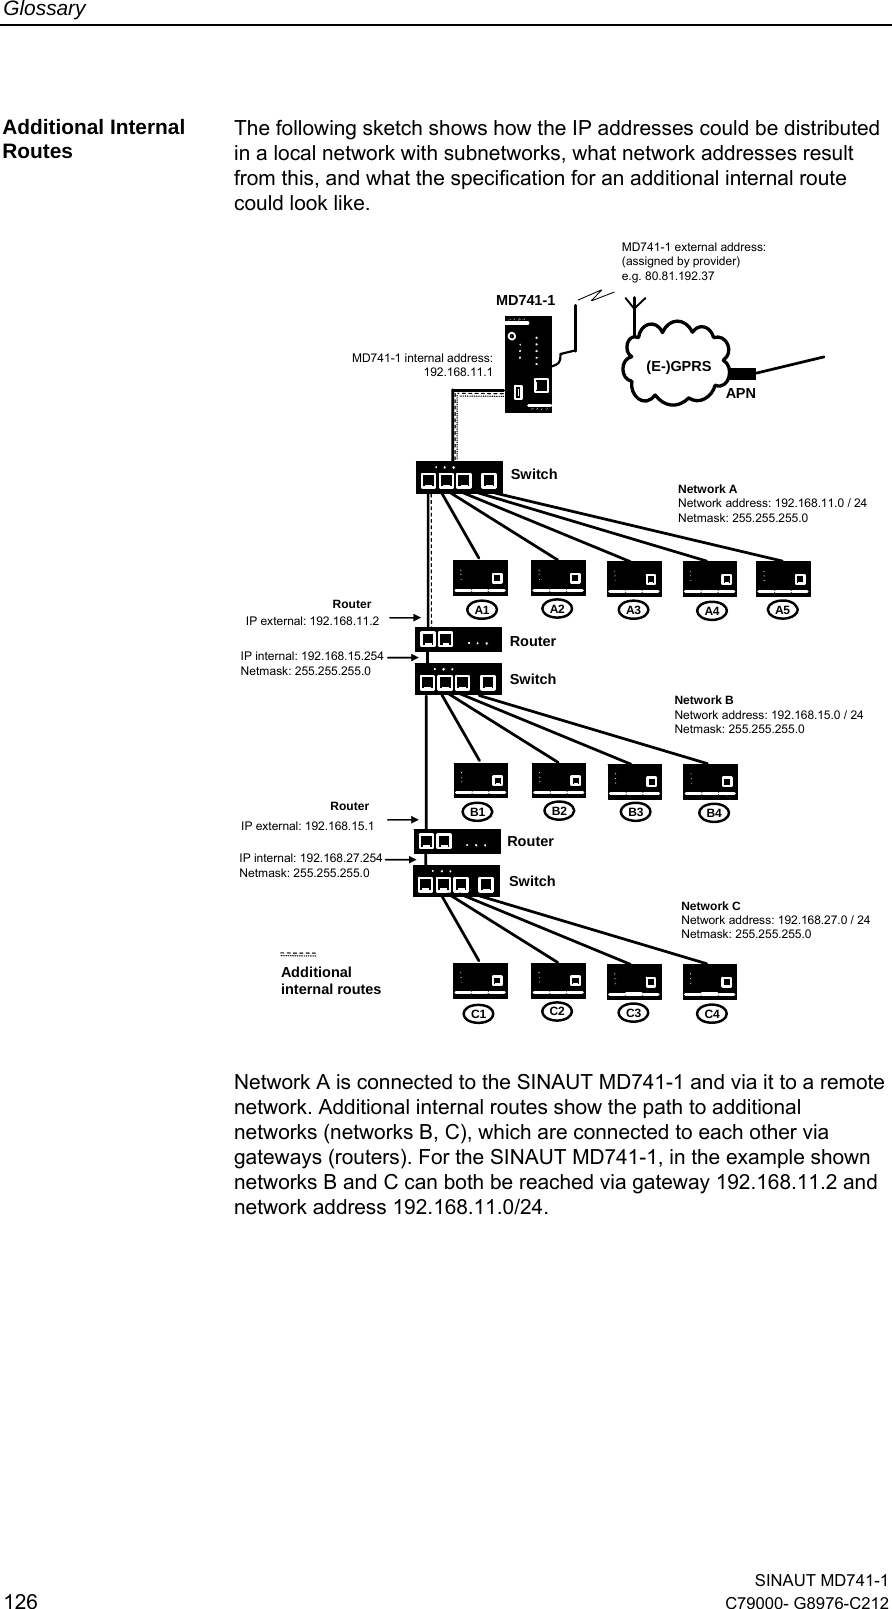 Glossary  SINAUT MD741-1 126  C79000- G8976-C212   Additional Internal Routes  The following sketch shows how the IP addresses could be distributed in a local network with subnetworks, what network addresses result from this, and what the specification for an additional internal route could look like. APN(E-)GPRSMD741-1SwitchRouterSwitchSwitchRouterA1 A2 A3 A4 A5B1 B2 B3 B4C1 C2 C3 C4RouterIP external: 192.168.11.2IP internal: 192.168.15.254Netmask: 255.255.255.0RouterIP external: 192.168.15.1IP internal: 192.168.27.254Netmask: 255.255.255.0Network ANetwork address: 192.168.11.0 / 24Netmask: 255.255.255.0Network BNetwork address: 192.168.15.0 / 24Netmask: 255.255.255.0Network CNetwork address: 192.168.27.0 / 24Netmask: 255.255.255.0MD741-1 internal address: 192.168.11.1MD741-1 external address:(assigned by provider)e.g. 80.81.192.37Additionalinternal routesNetwork A is connected to the SINAUT MD741-1 and via it to a remote network. Additional internal routes show the path to additional networks (networks B, C), which are connected to each other via gateways (routers). For the SINAUT MD741-1, in the example shown networks B and C can both be reached via gateway 192.168.11.2 and network address 192.168.11.0/24.   